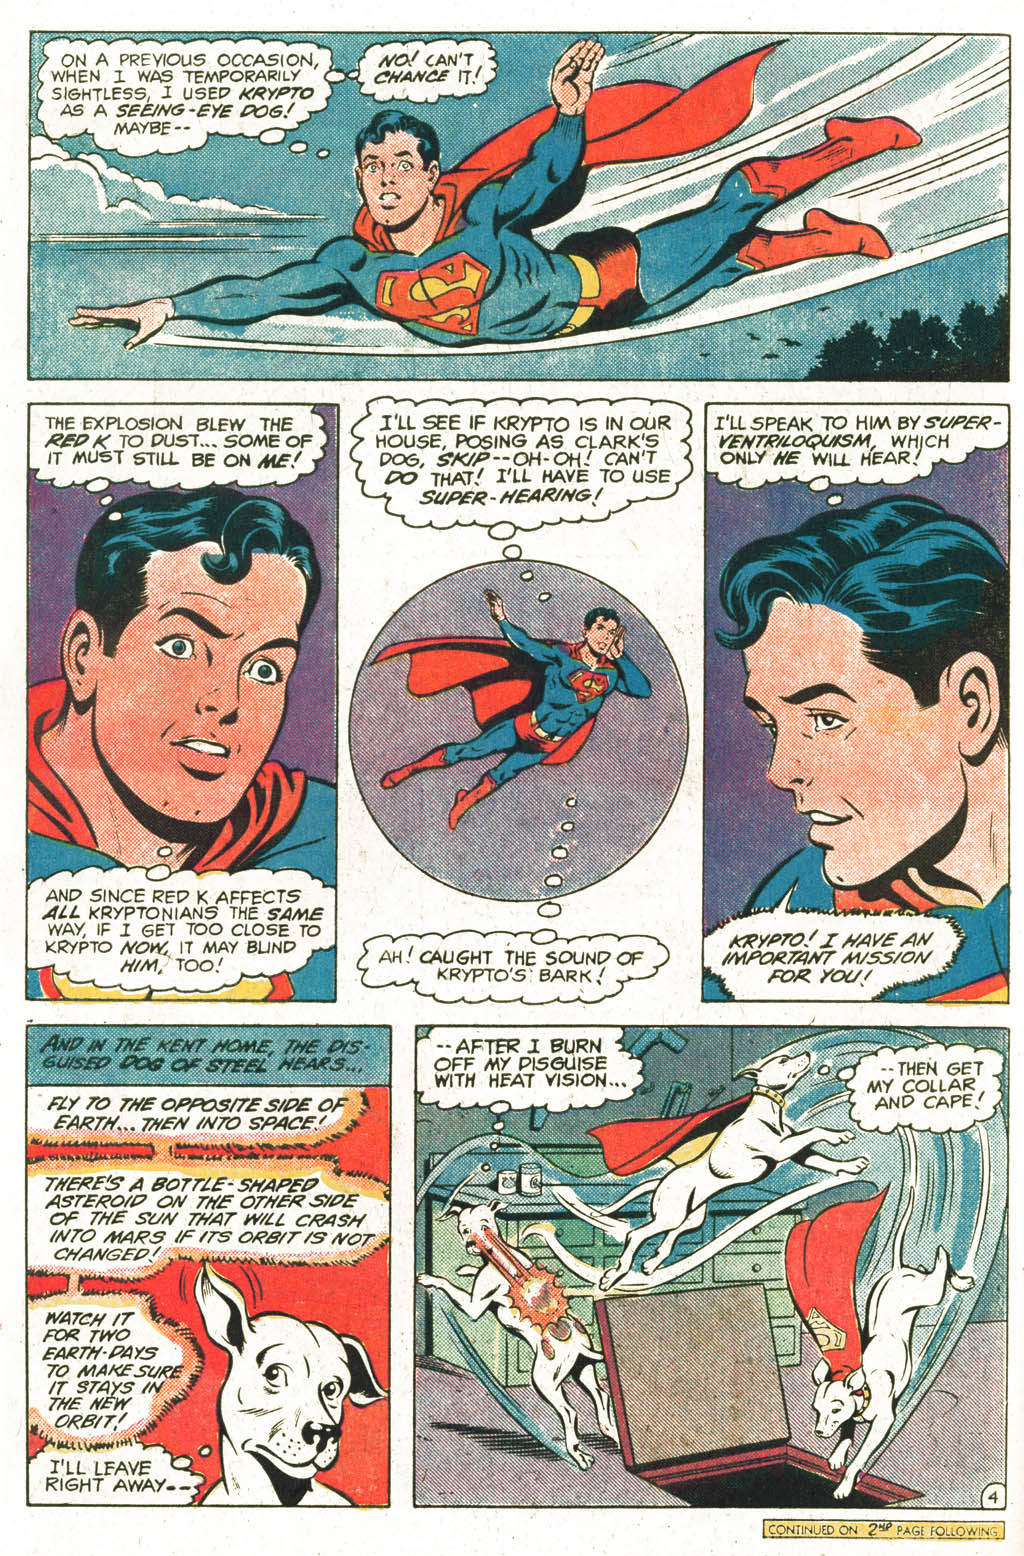 The New Adventures of Superboy 24 Page 4